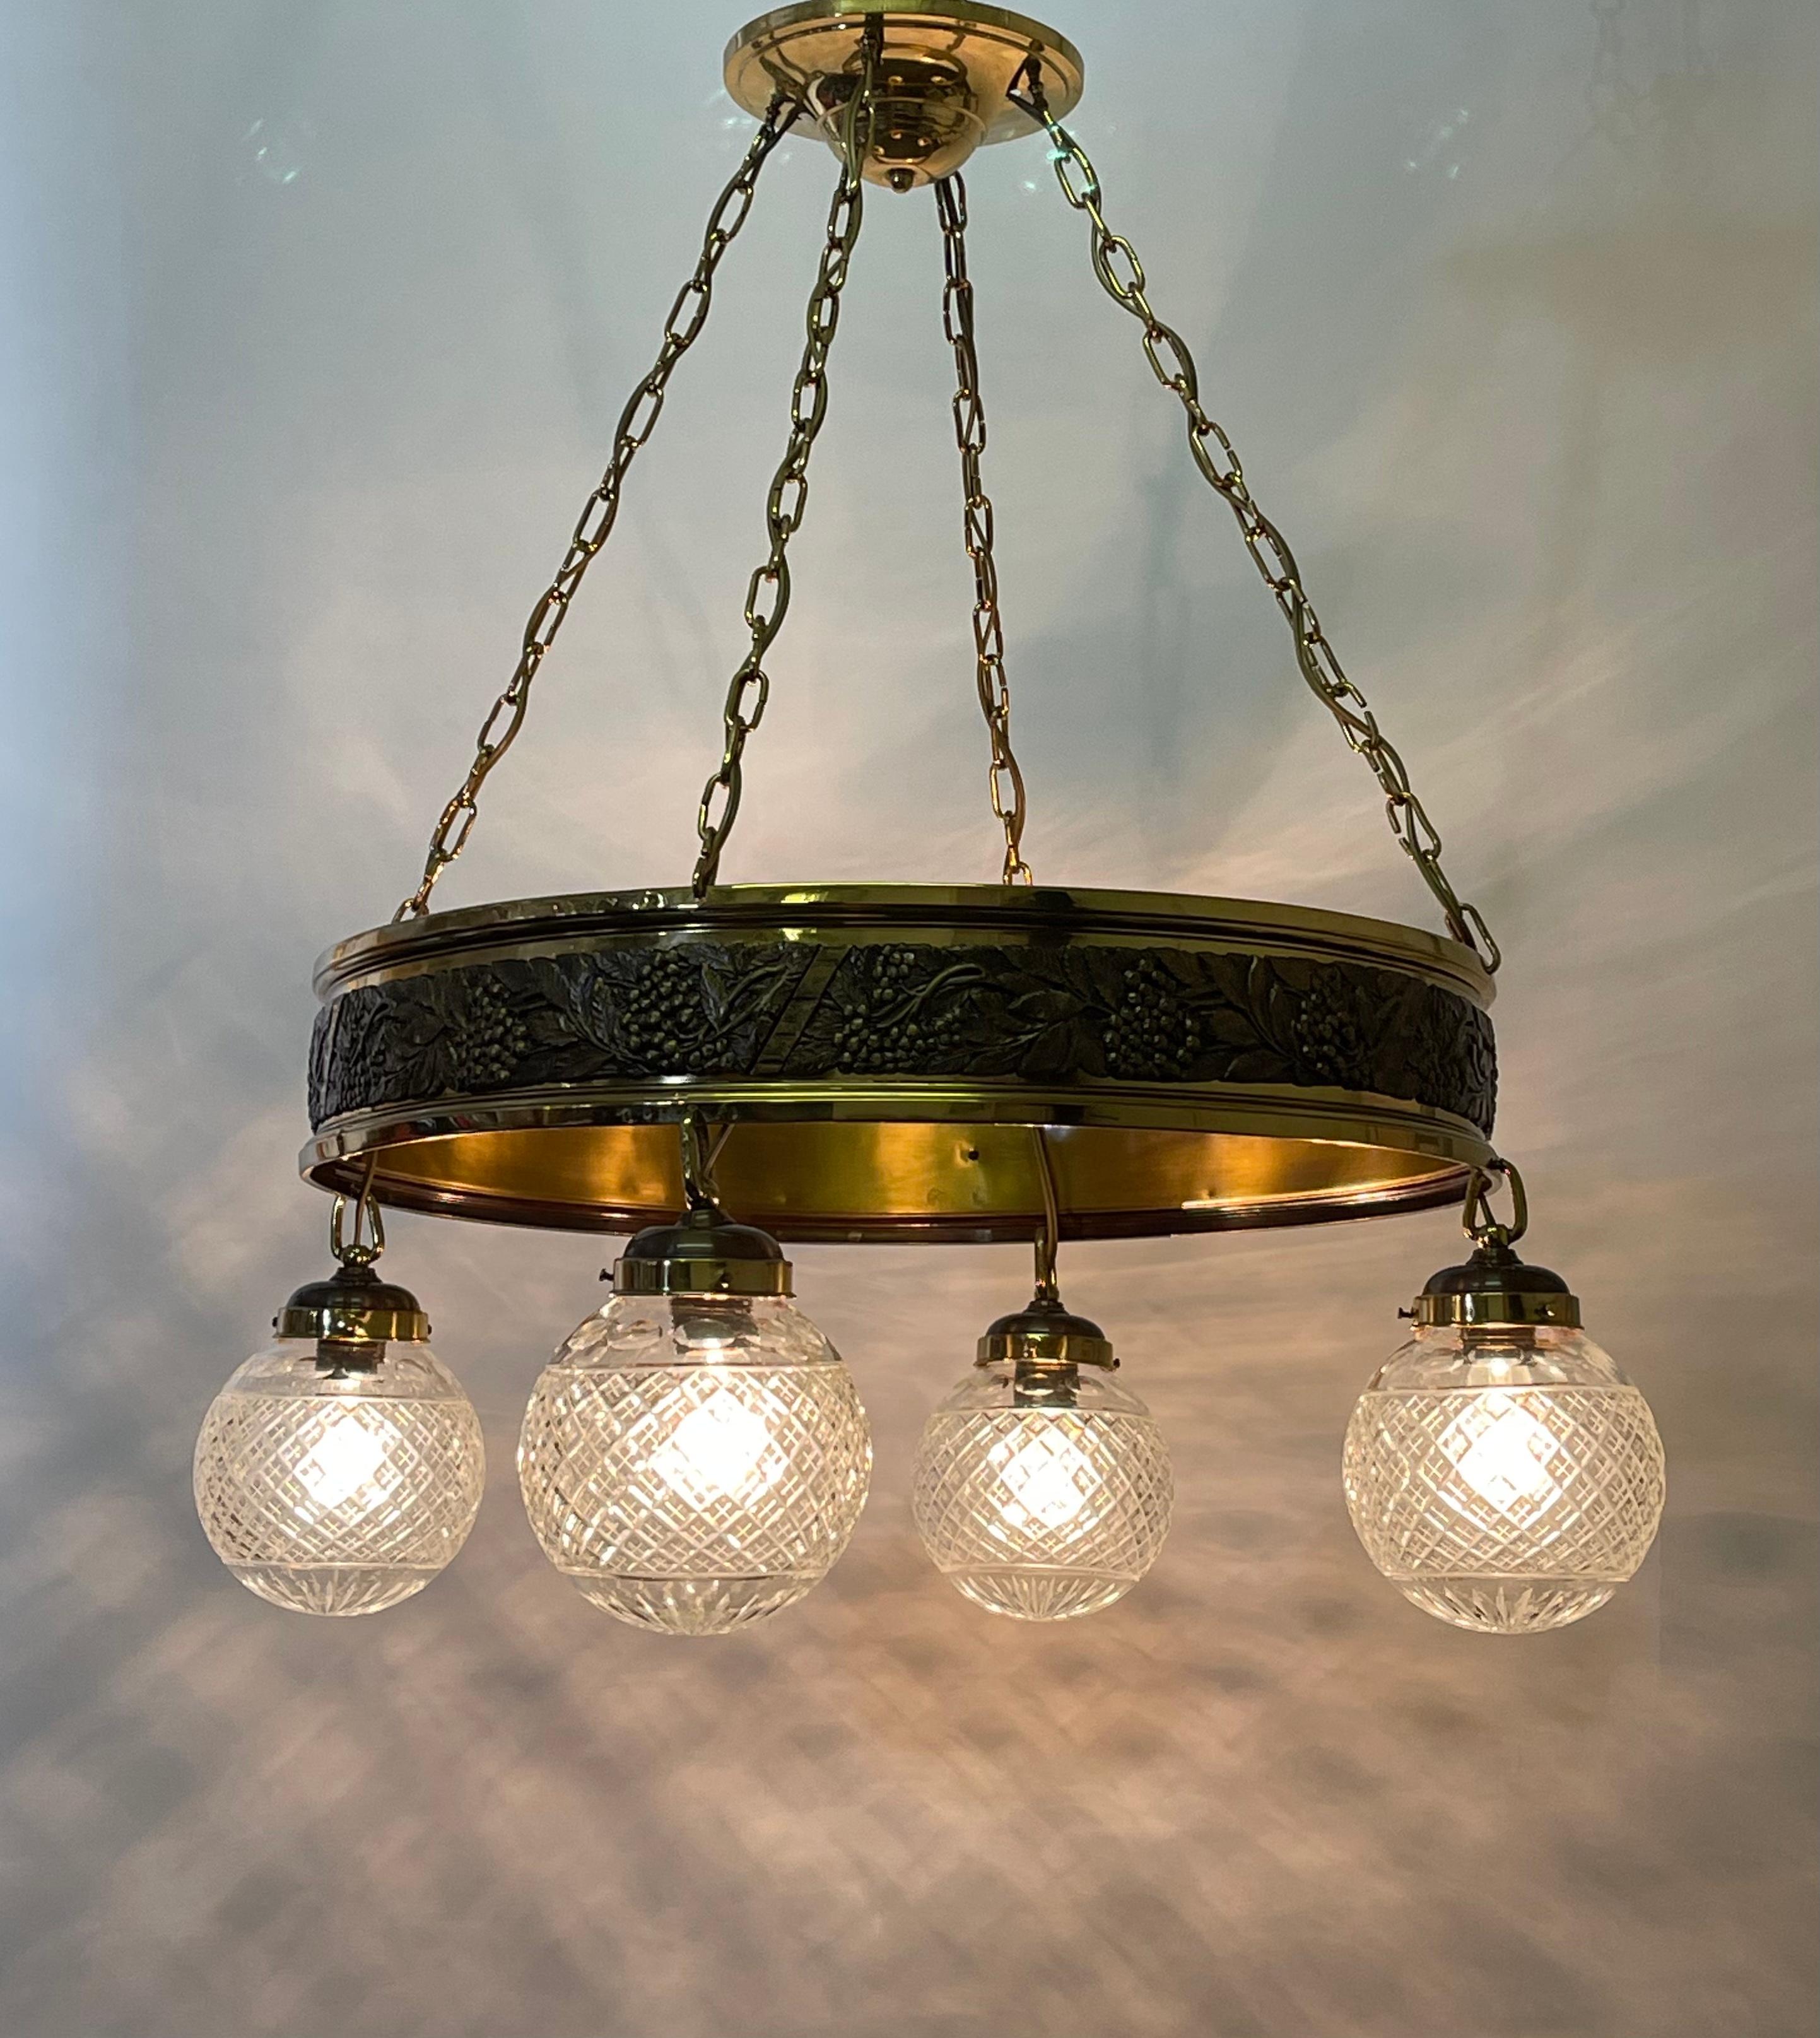 A wonderful early Art Deco chandelier, Germany, circa 1920s.
This beautiful chandelier is made of polished brass with grape motif and four cut-crystal globes.
Socket: 4 x e27 or e26 (US) for standard screw bulbs.

